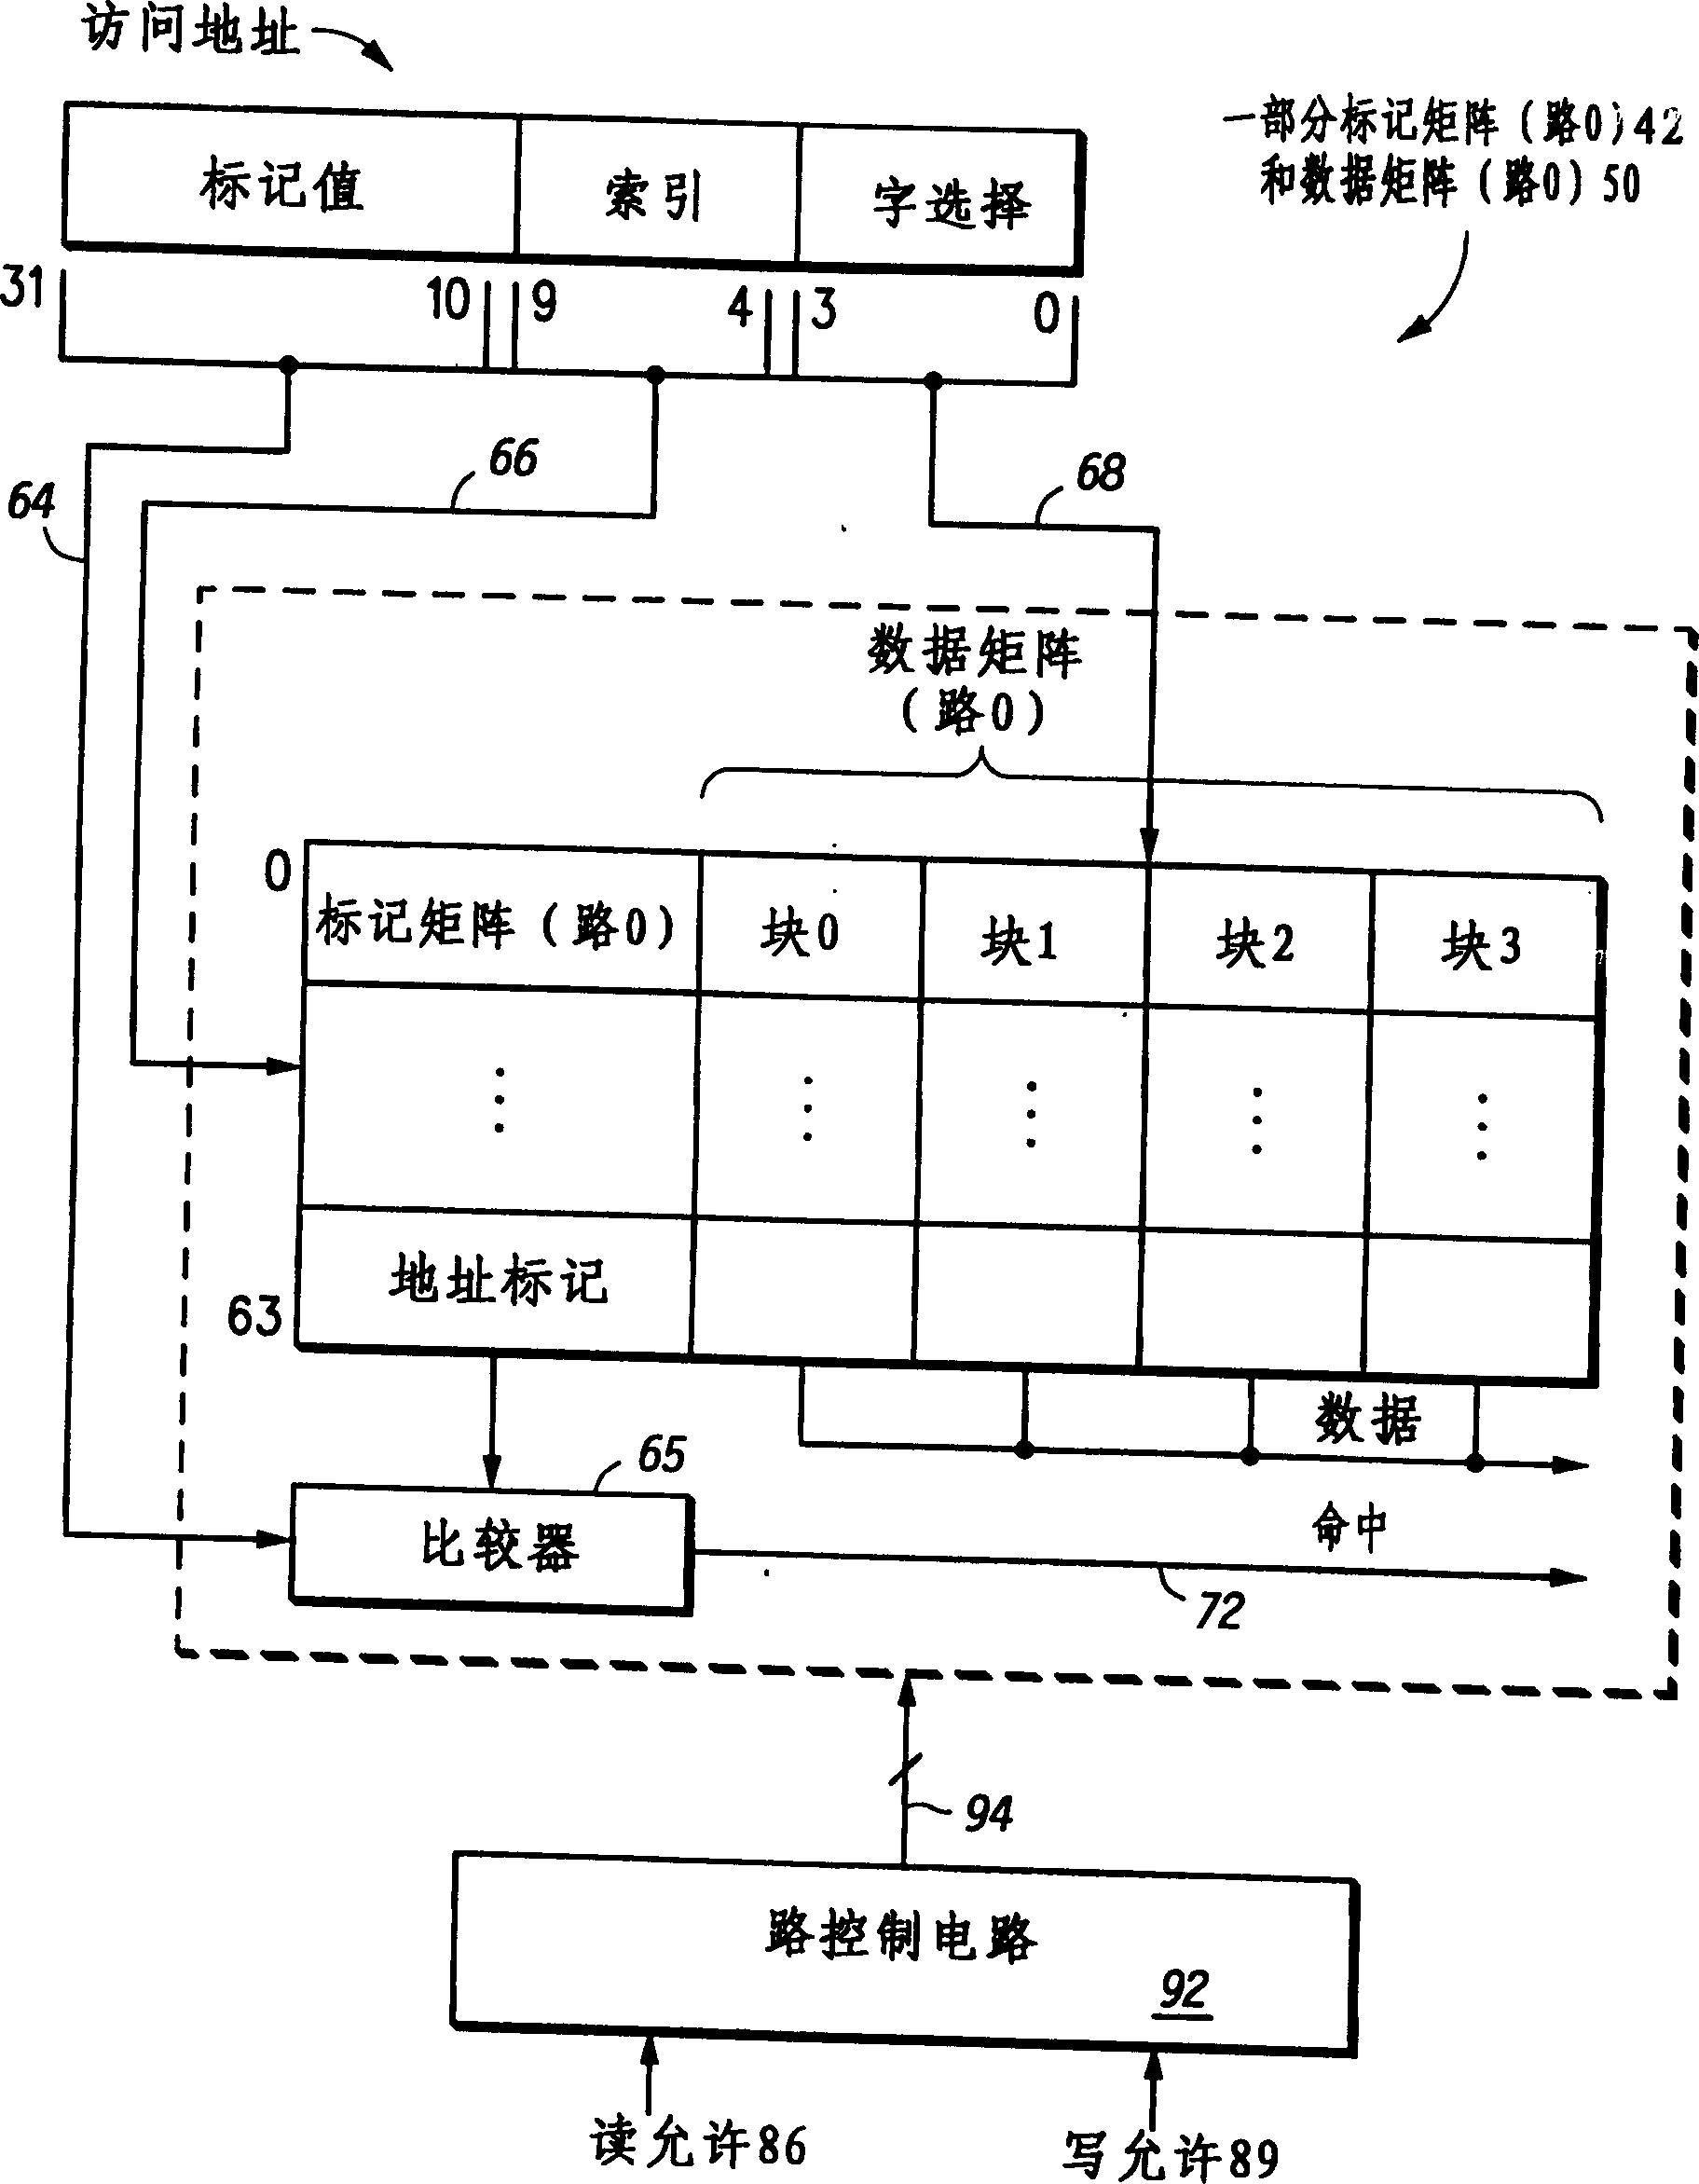 Multi-way cache apparatus and method